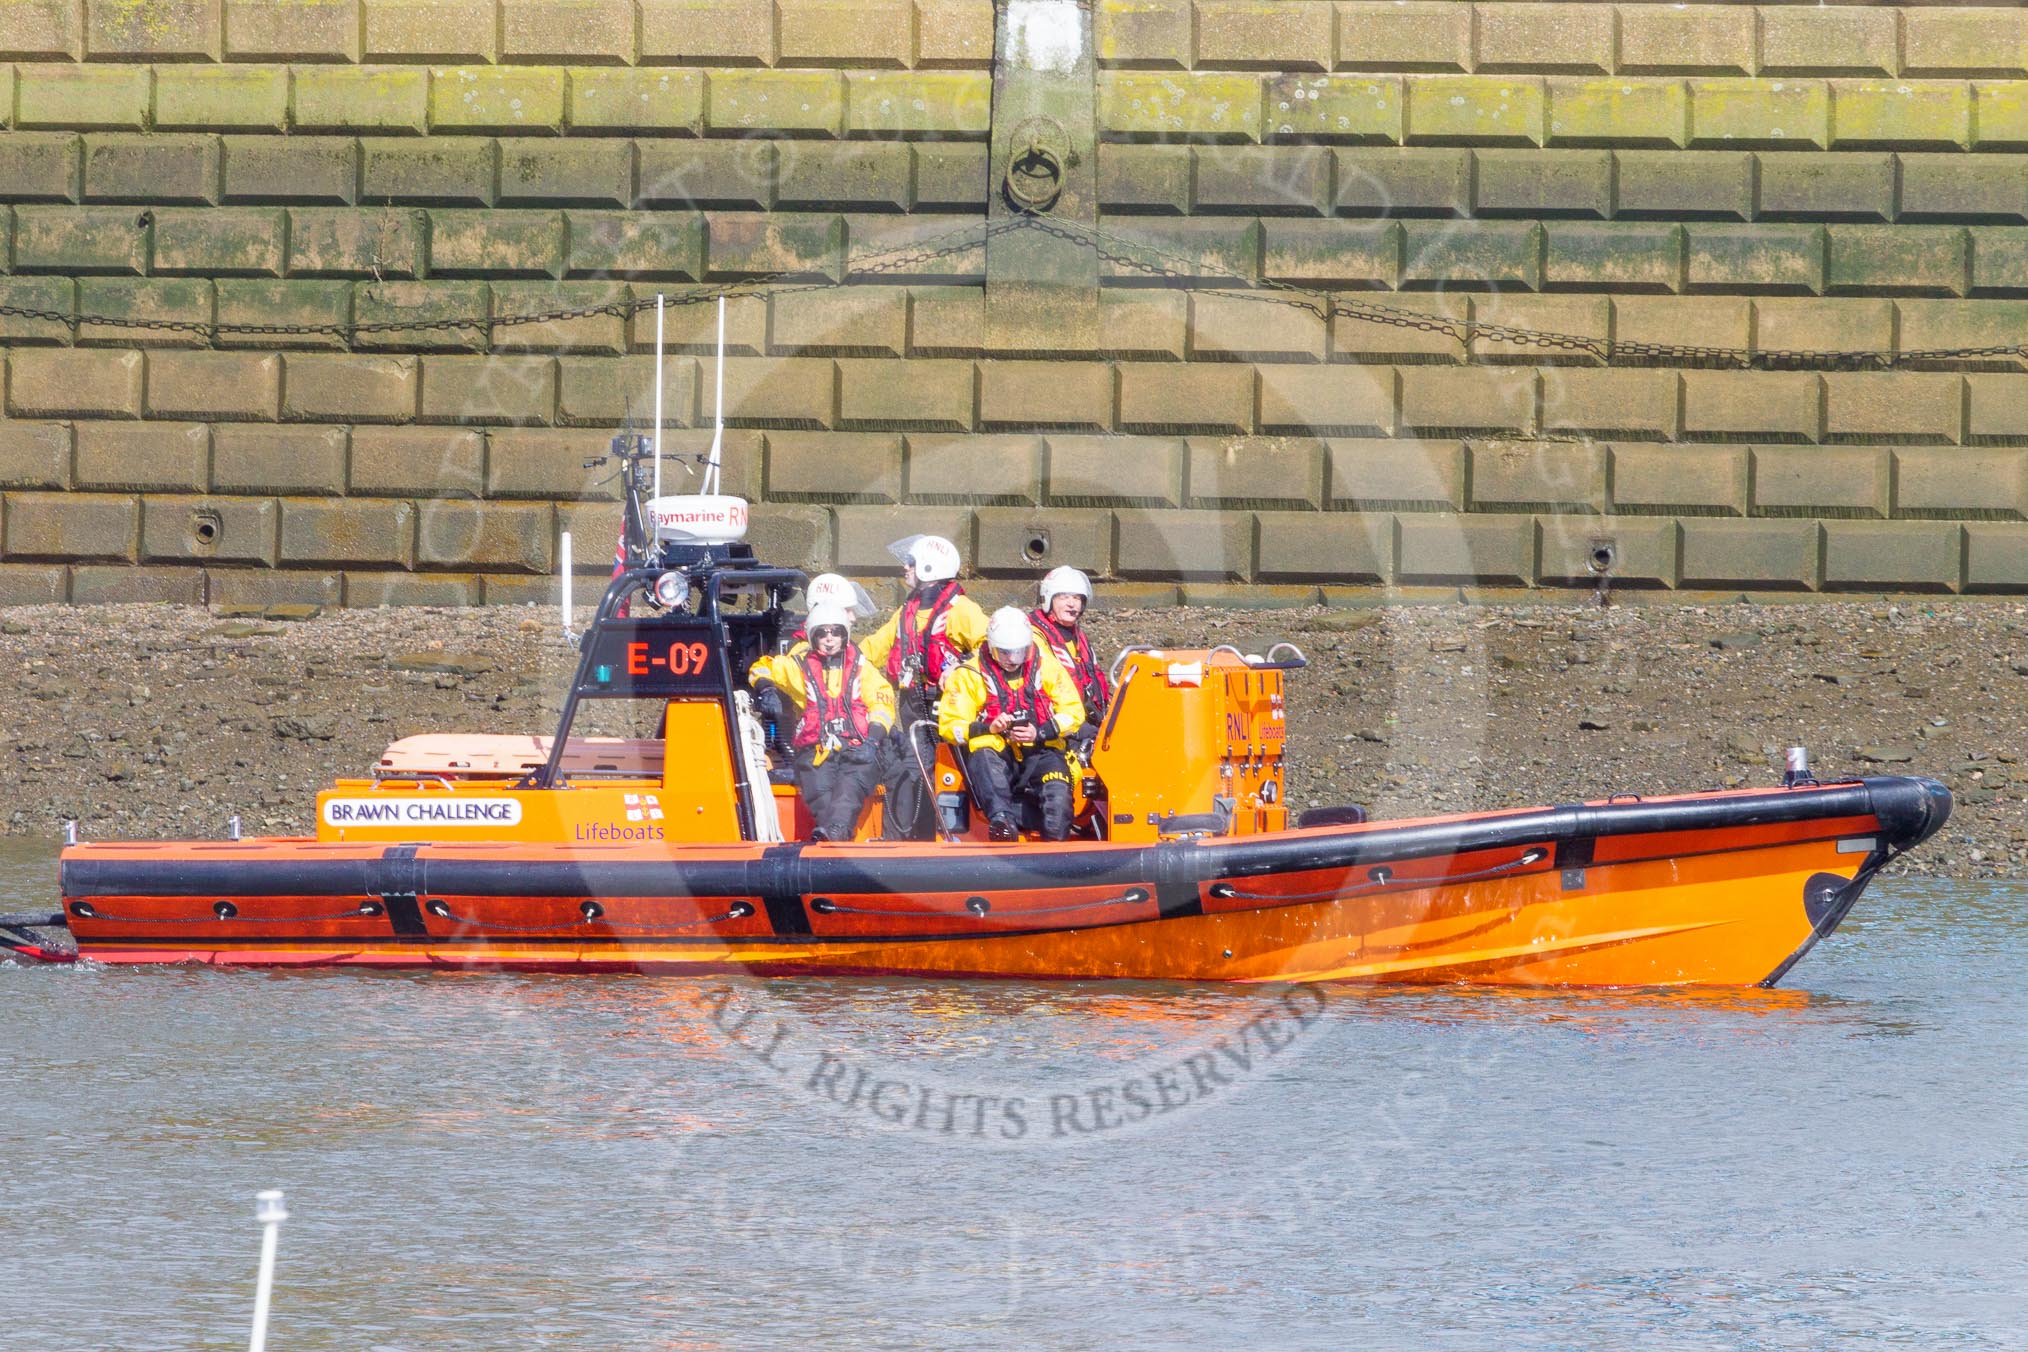 The Boat Race season 2016 -  The Cancer Research Women's Boat Race: RNLI lifeboatt E-09 in position at Putney Bridge - see http://j.mp/rnli-e-class for a highly detailed and entertaining virtual tour of the boat!.
River Thames between Putney Bridge and Mortlake,
London SW15,

United Kingdom,
on 27 March 2016 at 13:29, image #106